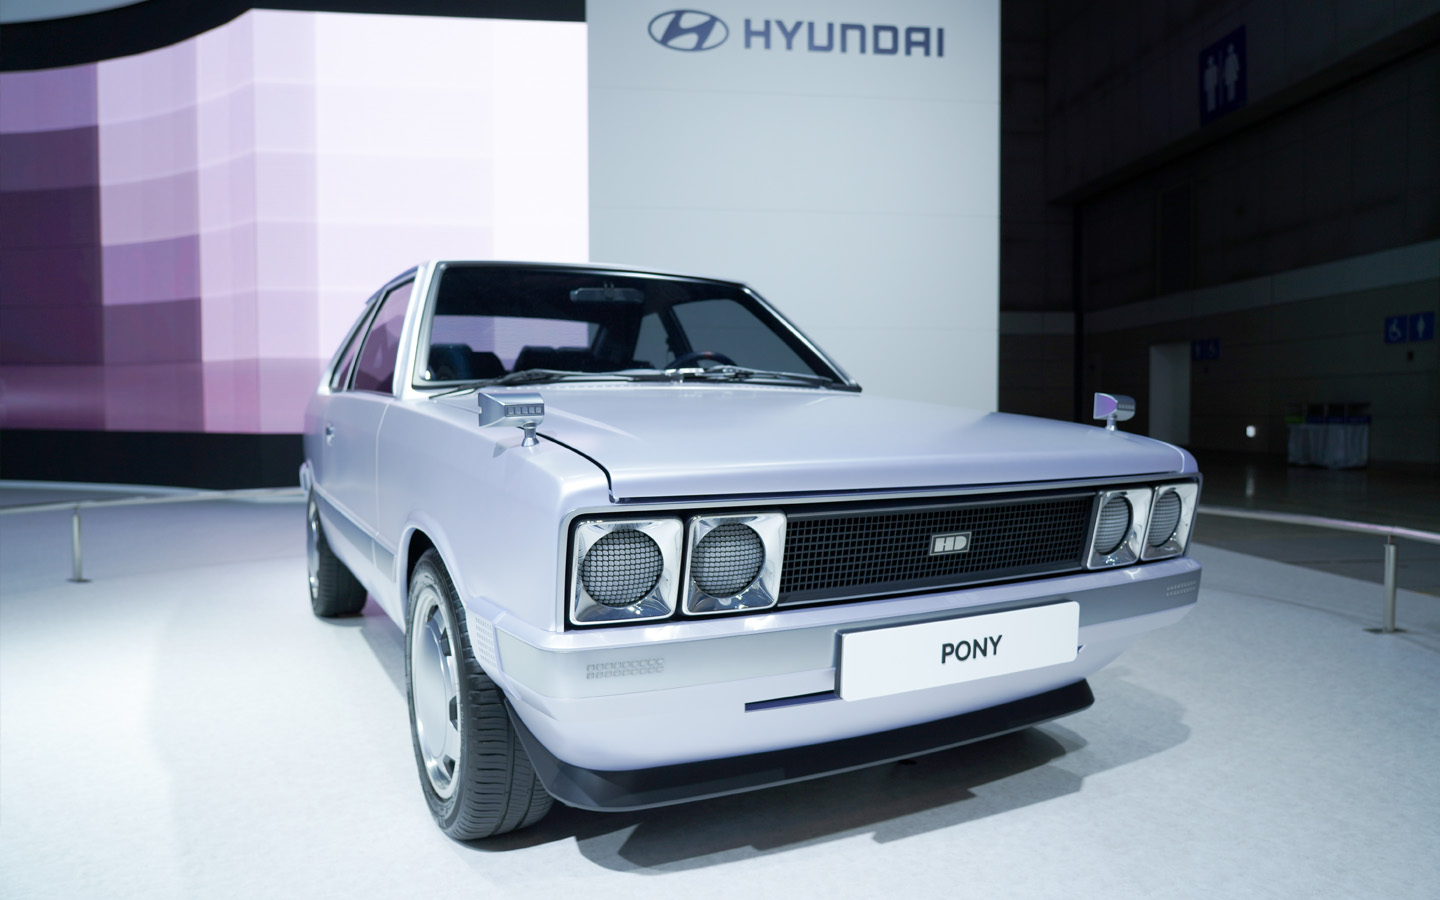 first cars of leading car brands (Hyundai)